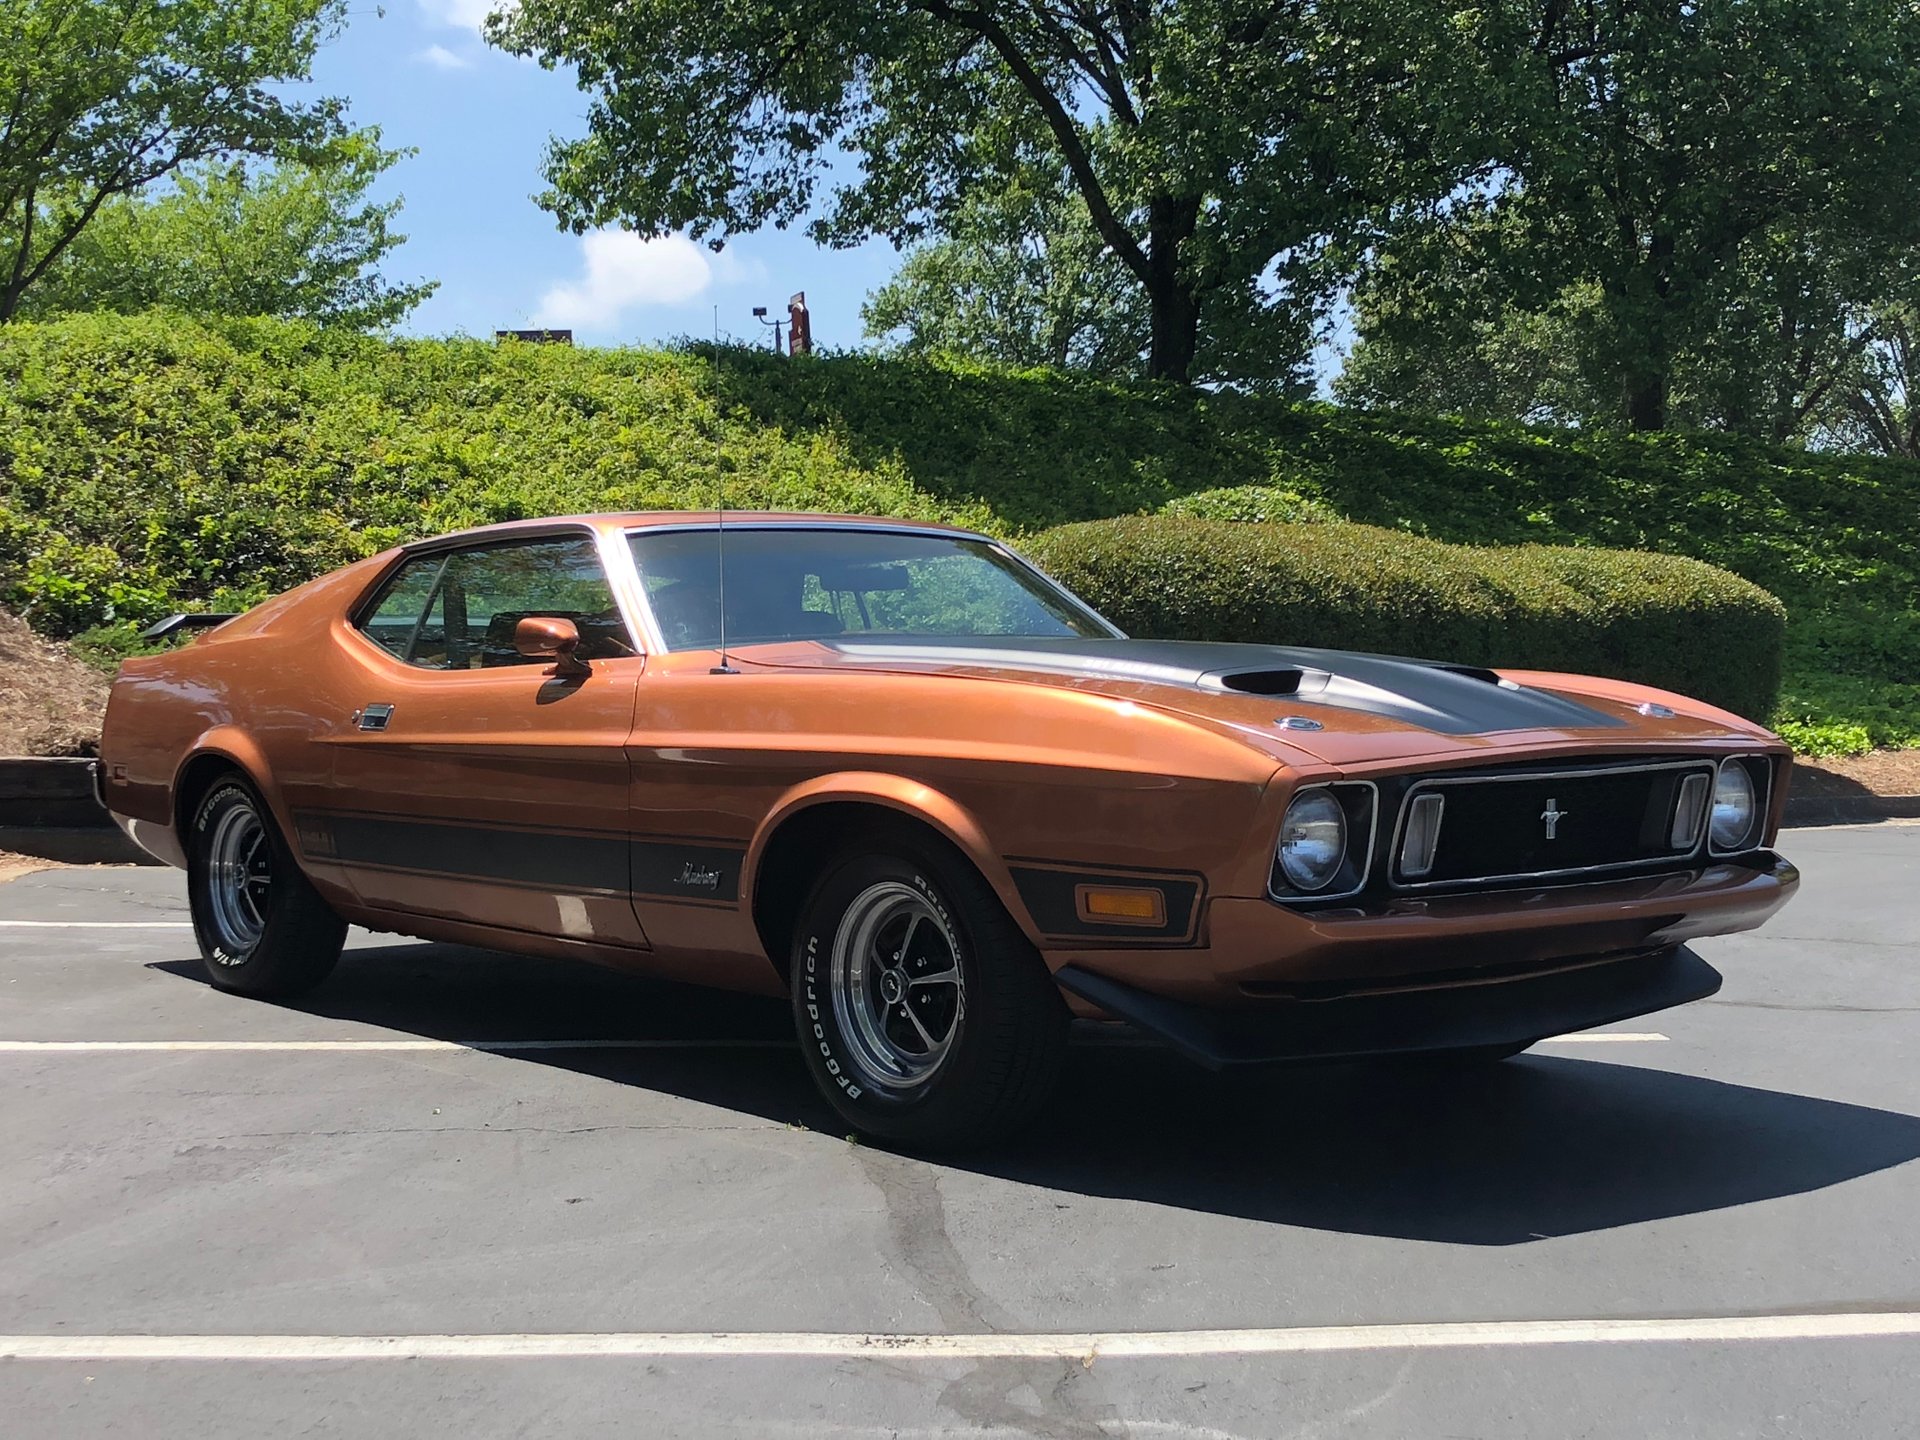 1973 Ford Mustang | GAA Classic Cars